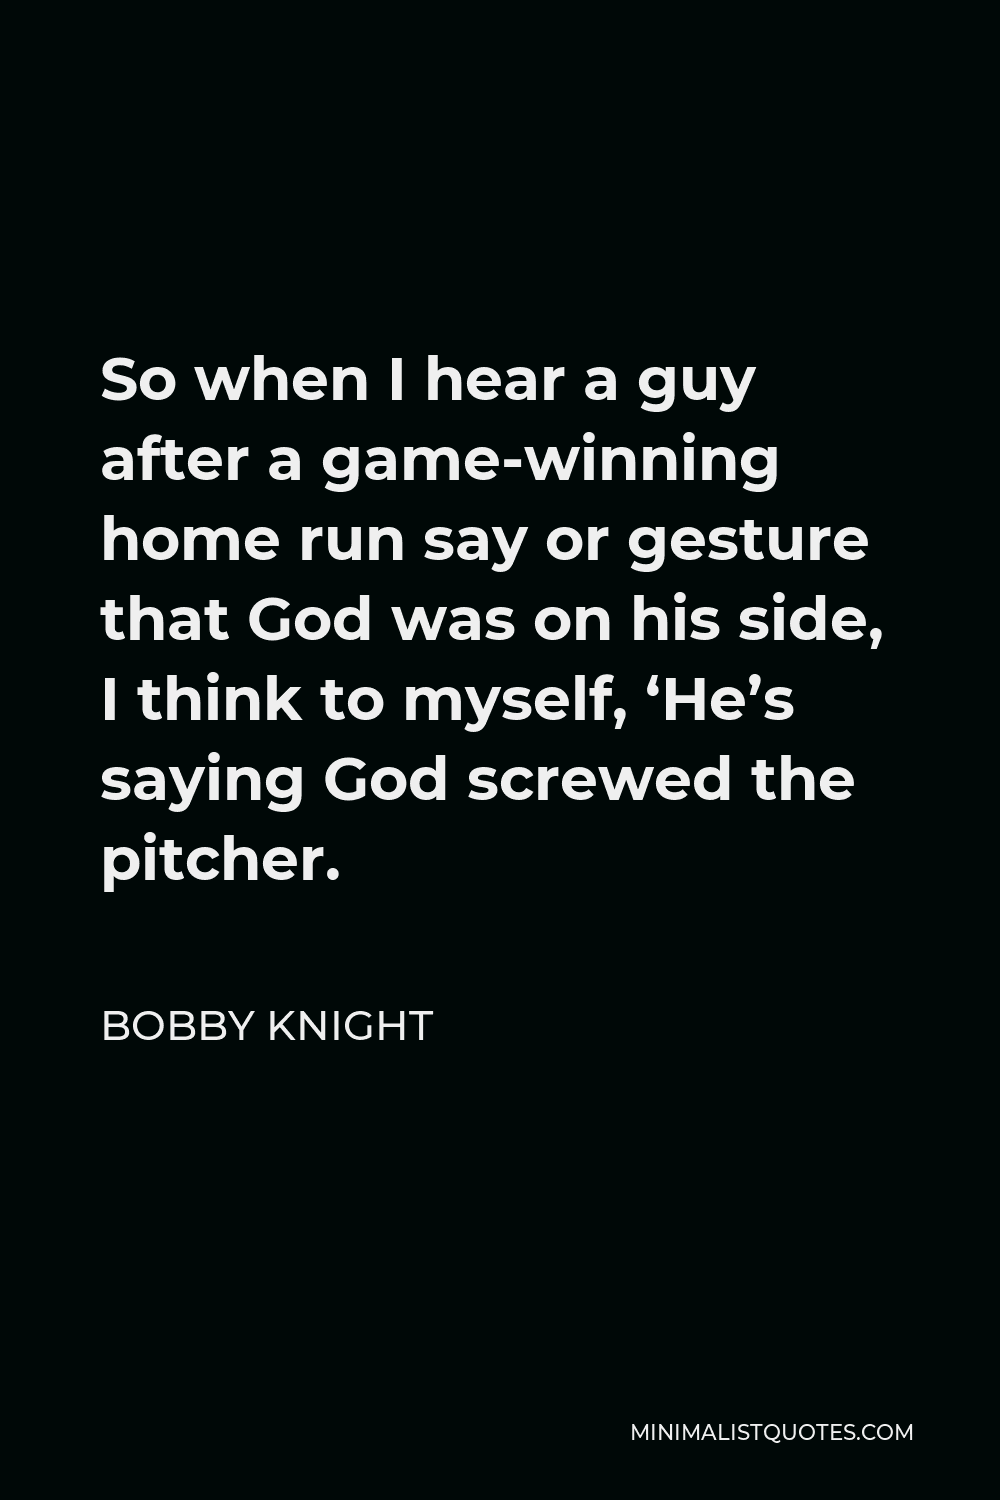 Bobby Knight Quote - So when I hear a guy after a game-winning home run say or gesture that God was on his side, I think to myself, ‘He’s saying God screwed the pitcher.